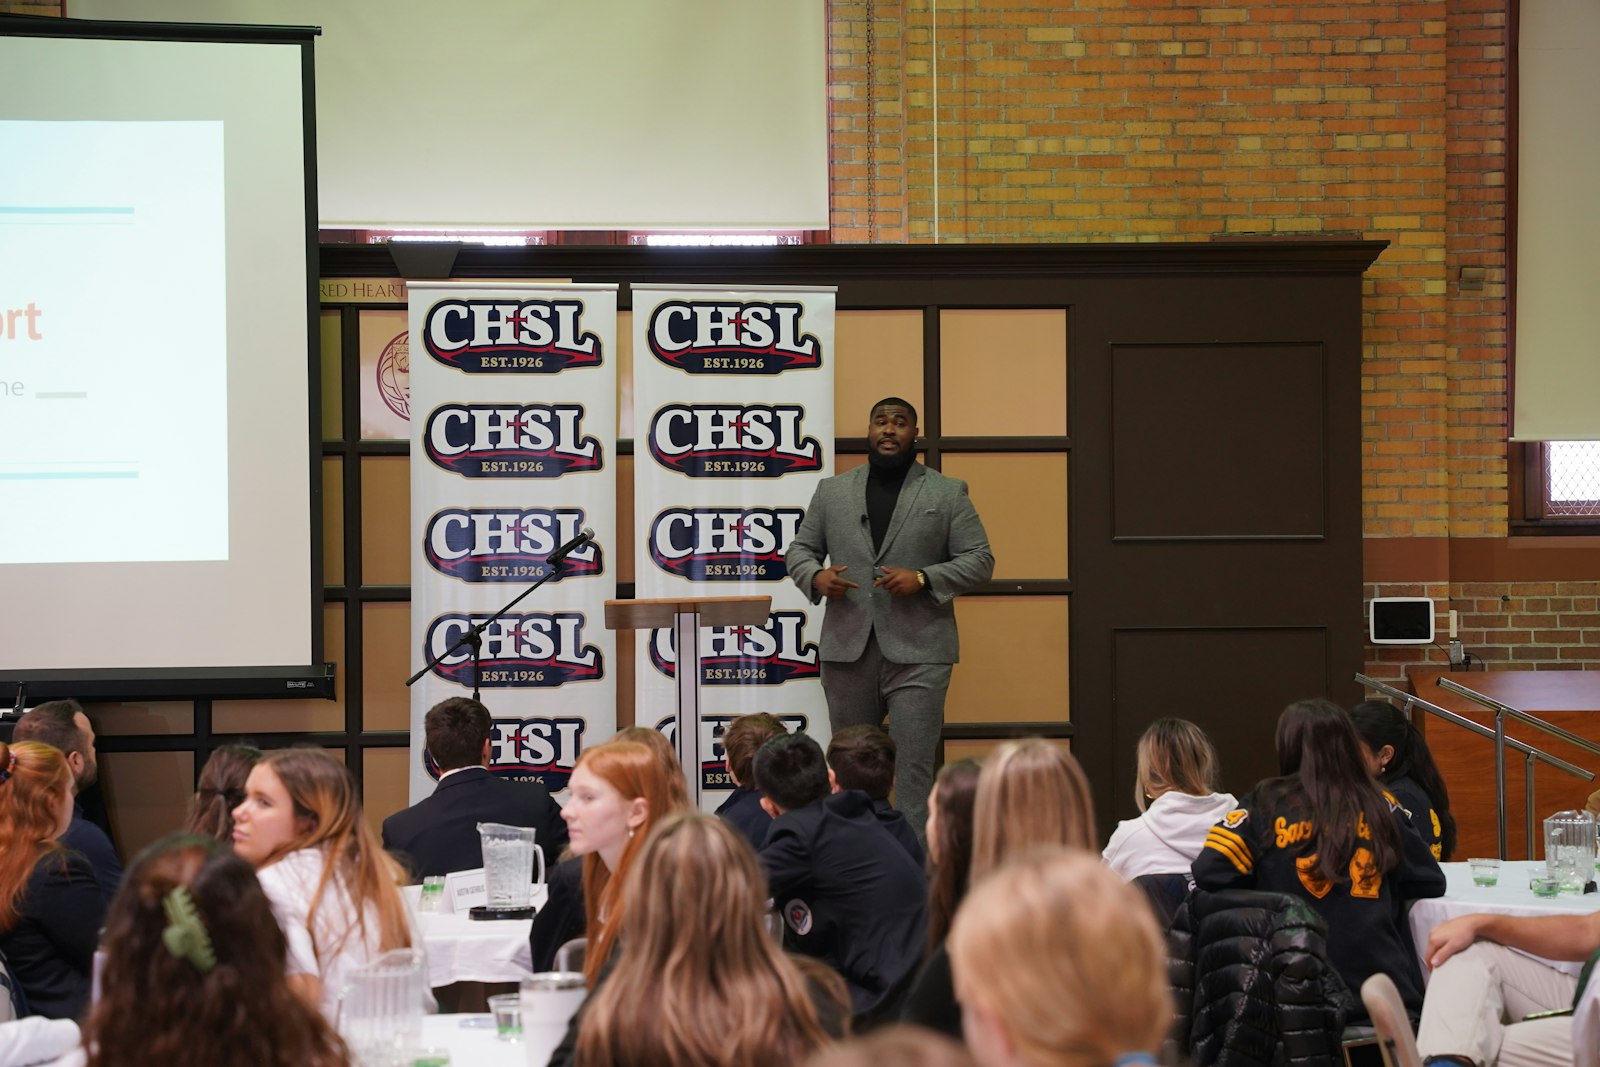 Chris Okoye, a Detroit Catholic Central High School alumnus who has played for the NFL's Cincinnati Bengals and in the USFL, speaks to Catholic High School League student-athletes about what it takes to execute the plan God has given each person and how his faith helped him overcome challenges in his career.